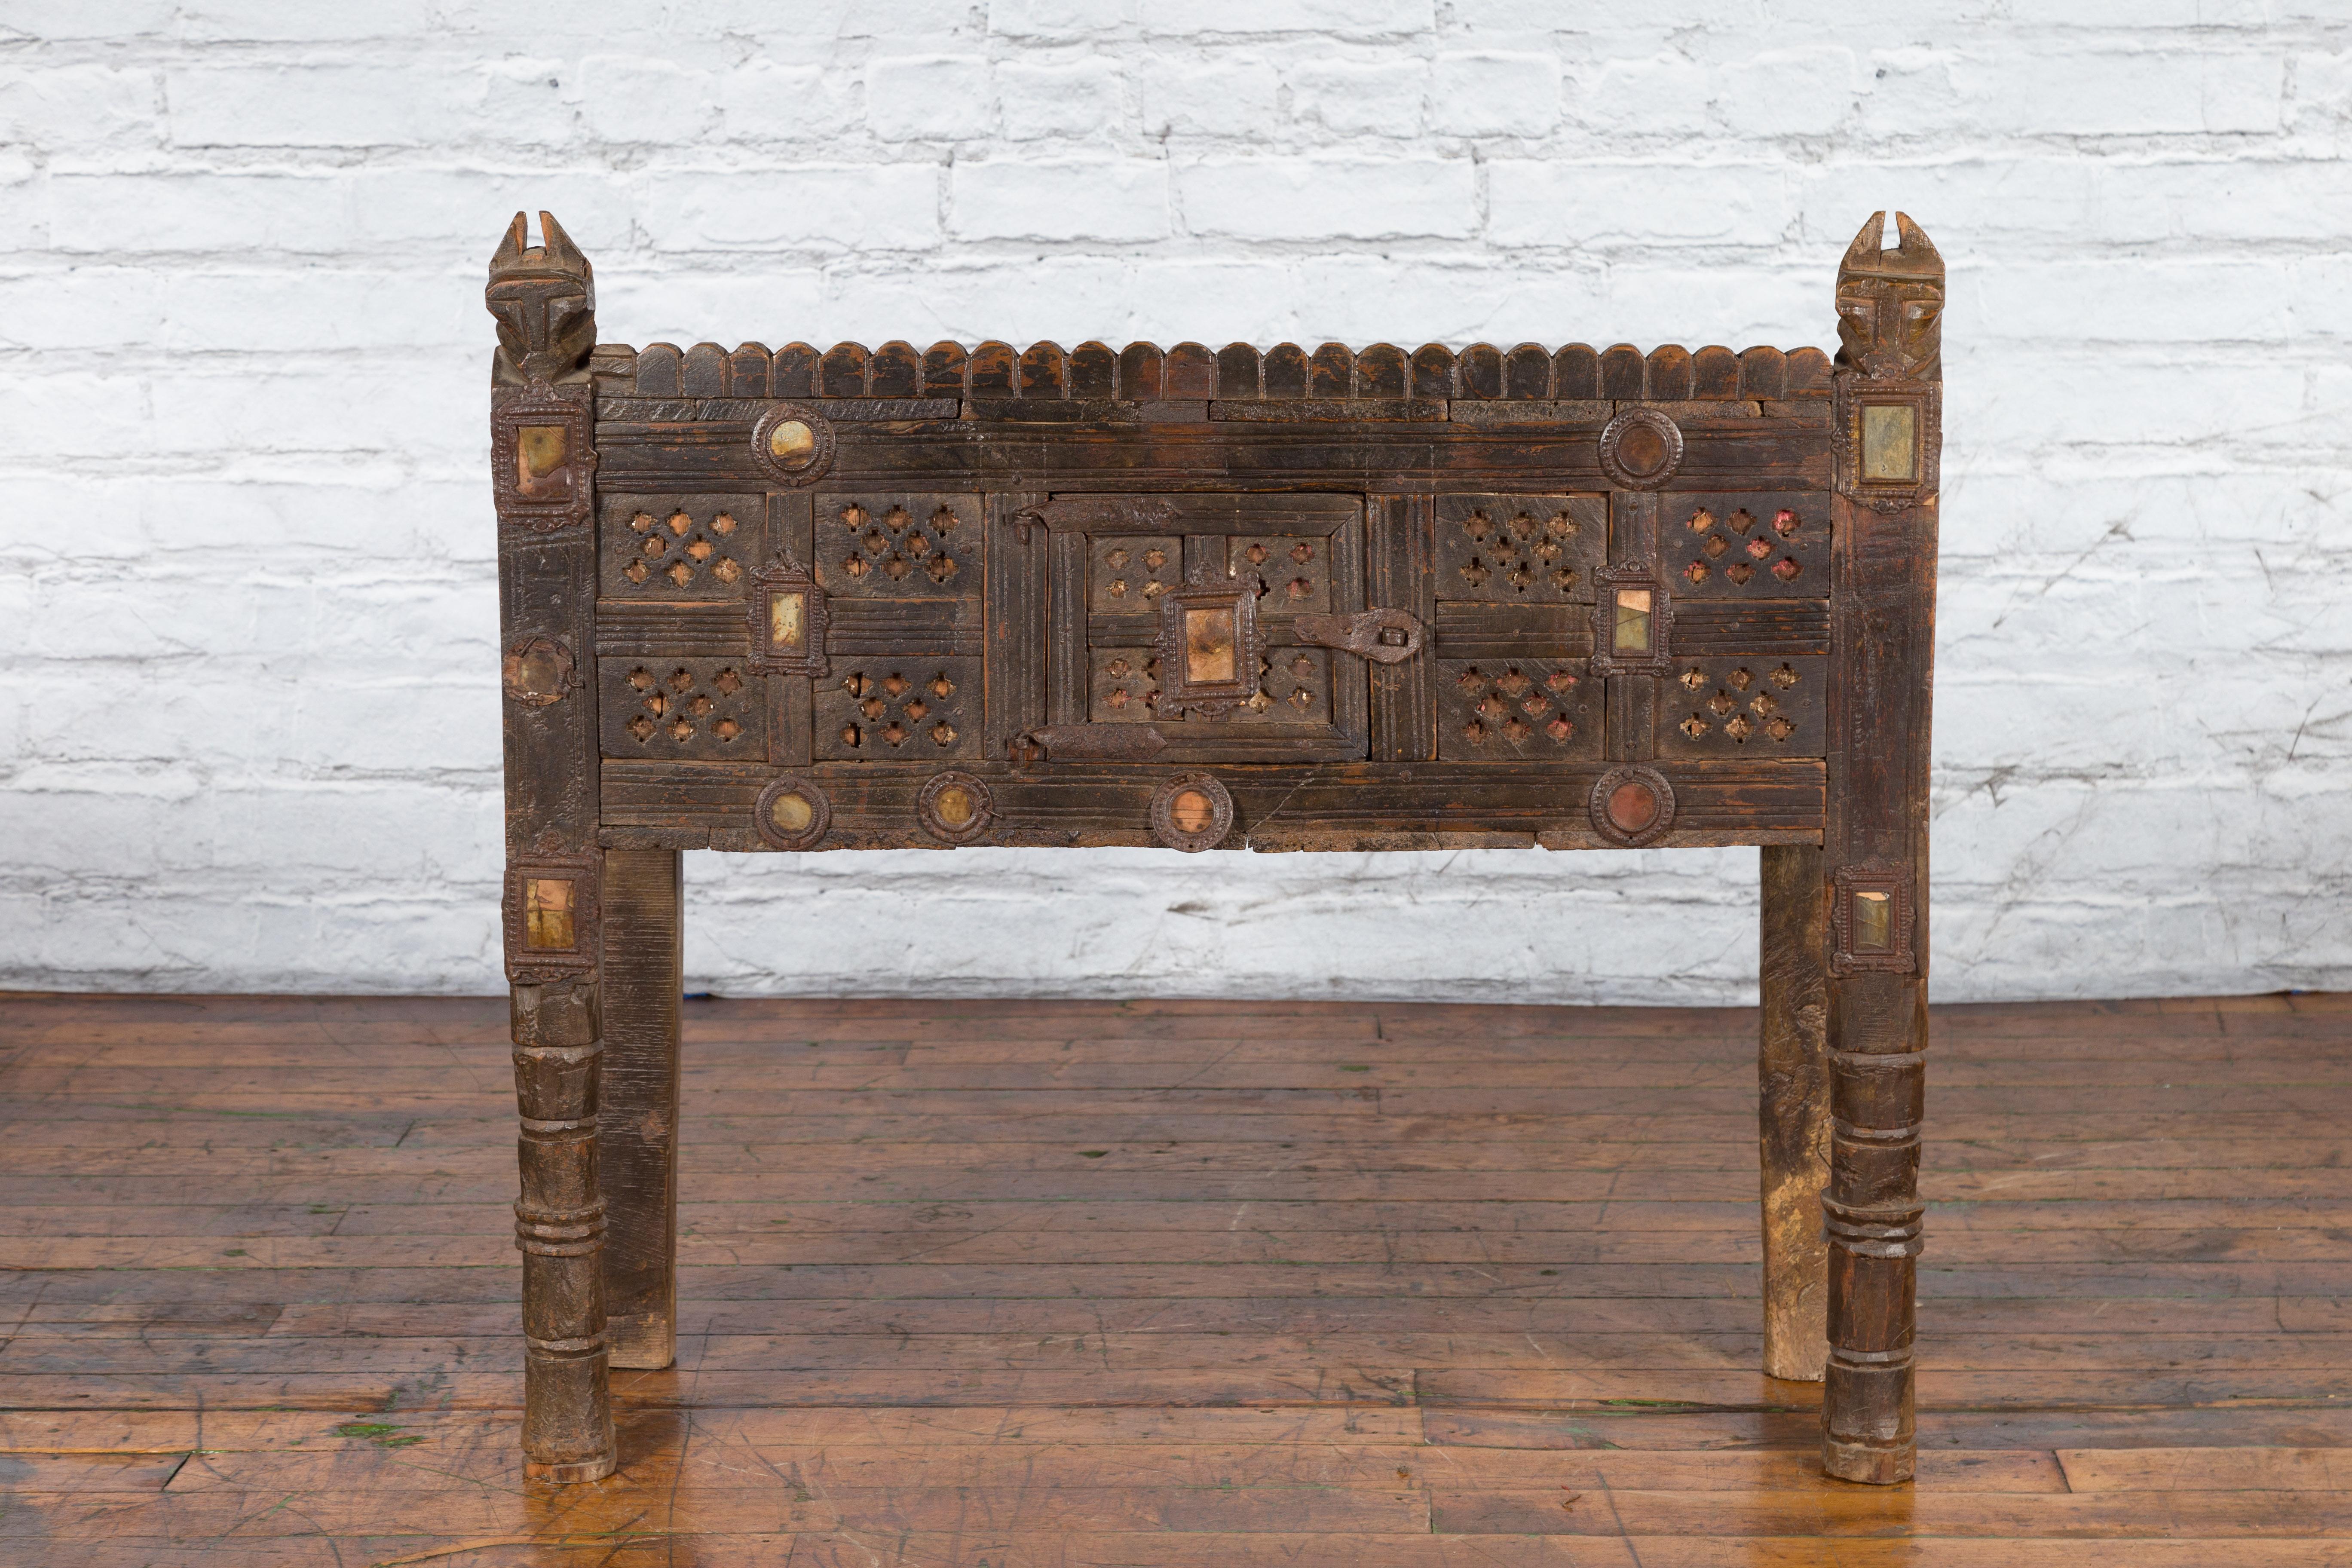 An antique Indian Damachiya bridal cabinet from the 19th century, with geometric patterns, inlaid mirrors and carved stylized horse heads. Created in India to store bridal dowries, this Damachiya cabinet captures our attention with its intricate